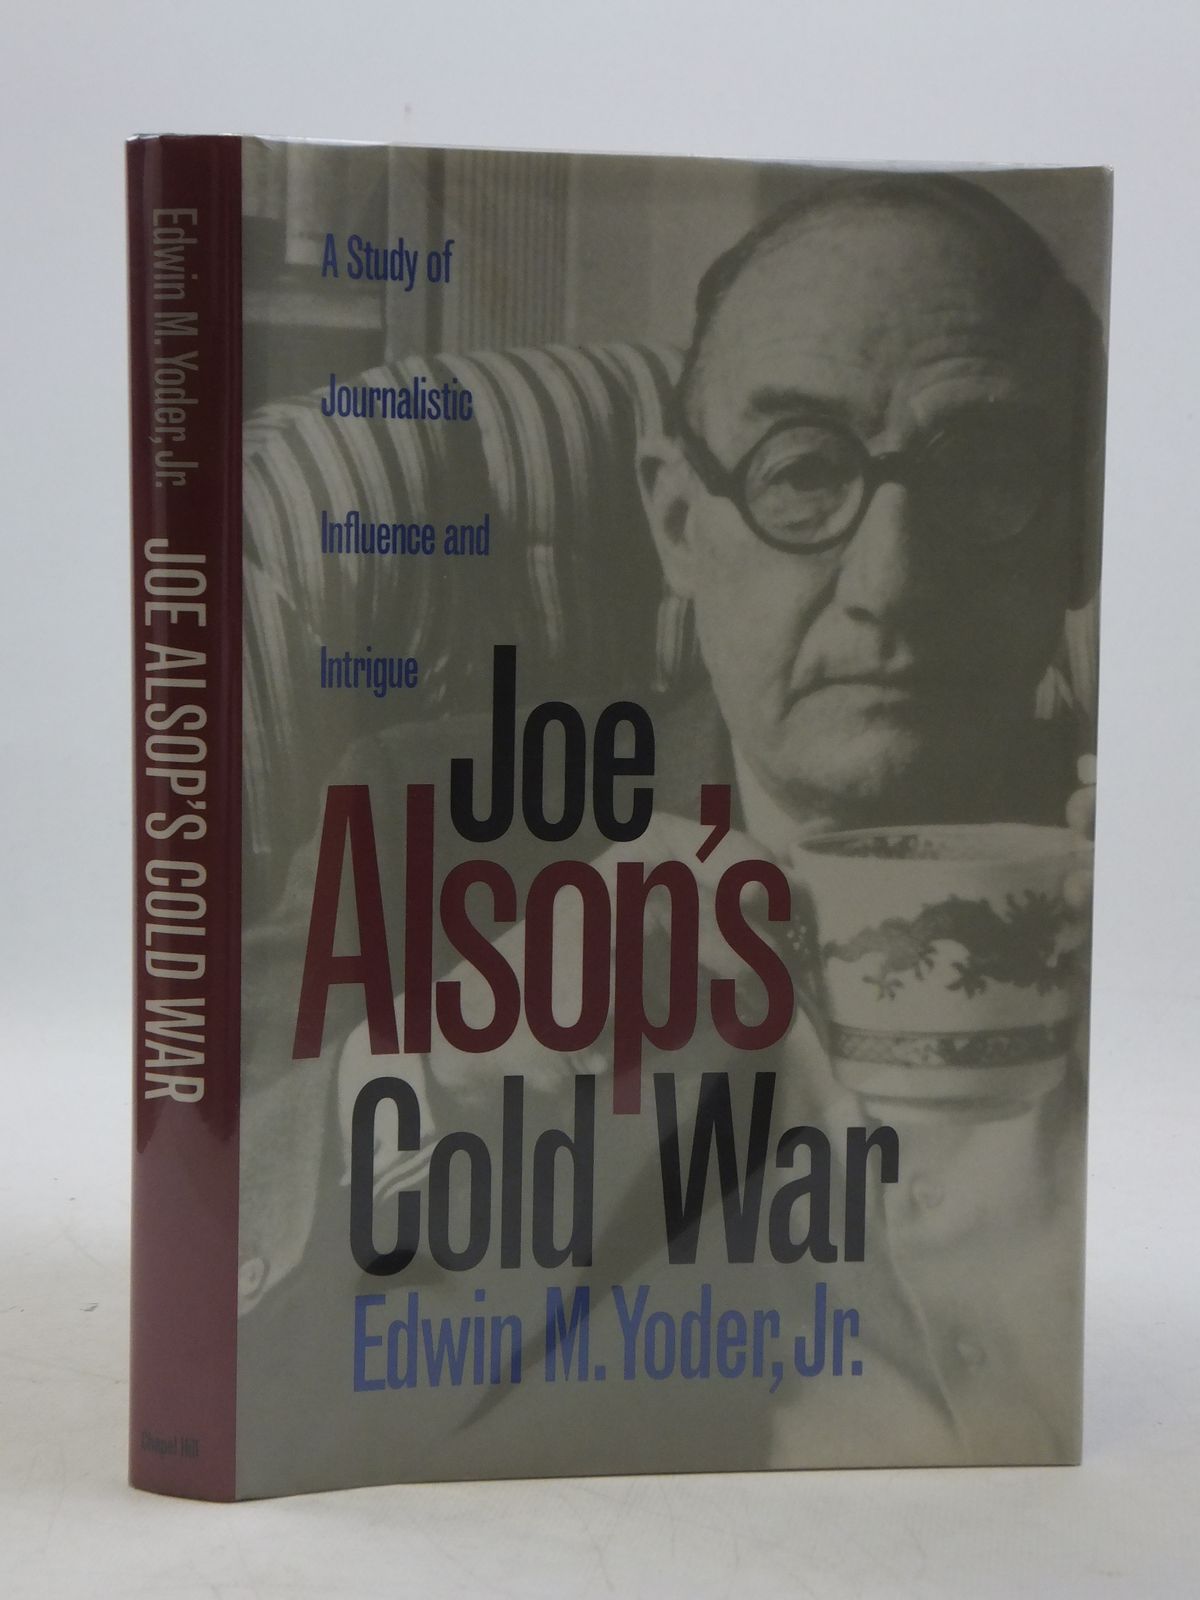 Photo of JOE ALSOP'S COLD WAR written by Yoder, Edwin M. published by University Of North Carolina Press (STOCK CODE: 1604701)  for sale by Stella & Rose's Books